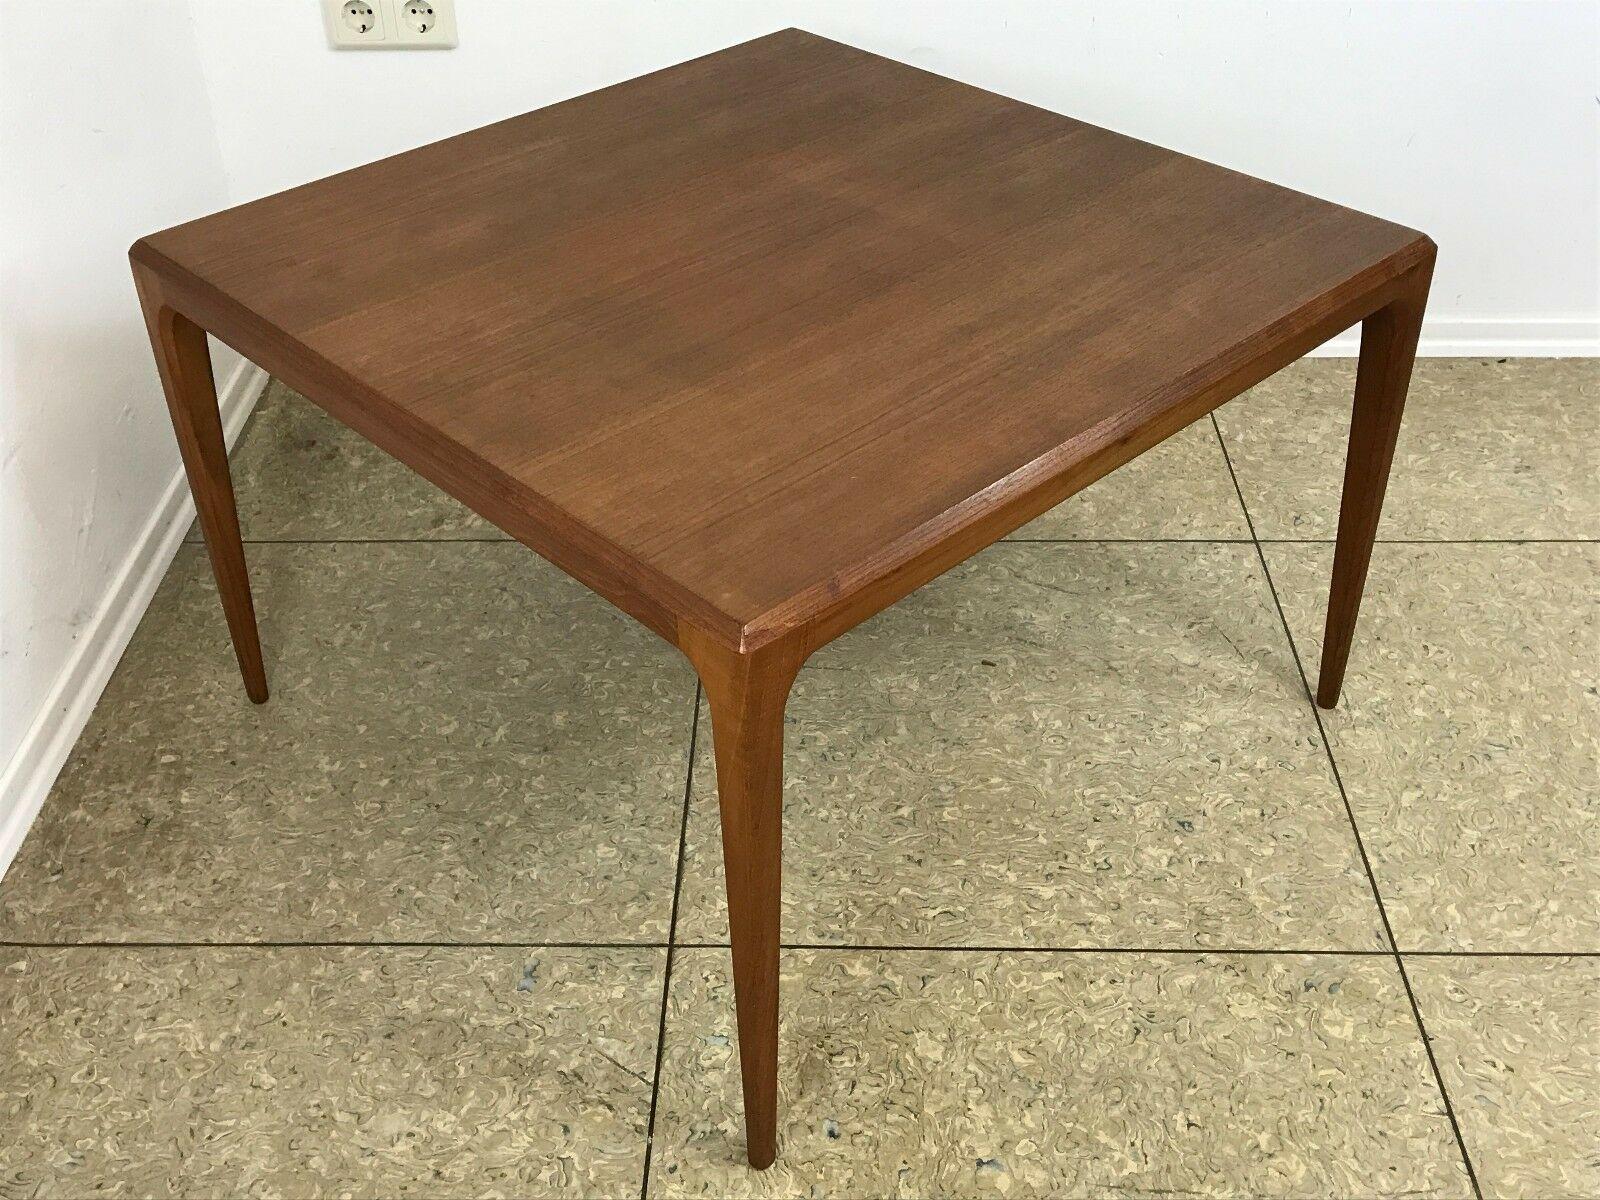 60s 70s teak coffee table side table by Johannes for Silkeborg Danish

Object: coffee table

Manufacturer: Silkeborg

Condition: good

Age: around 1960-1970

Dimensions:

76.5cm x 76.5cm x 49.5cm

Other notes:

The pictures serve as